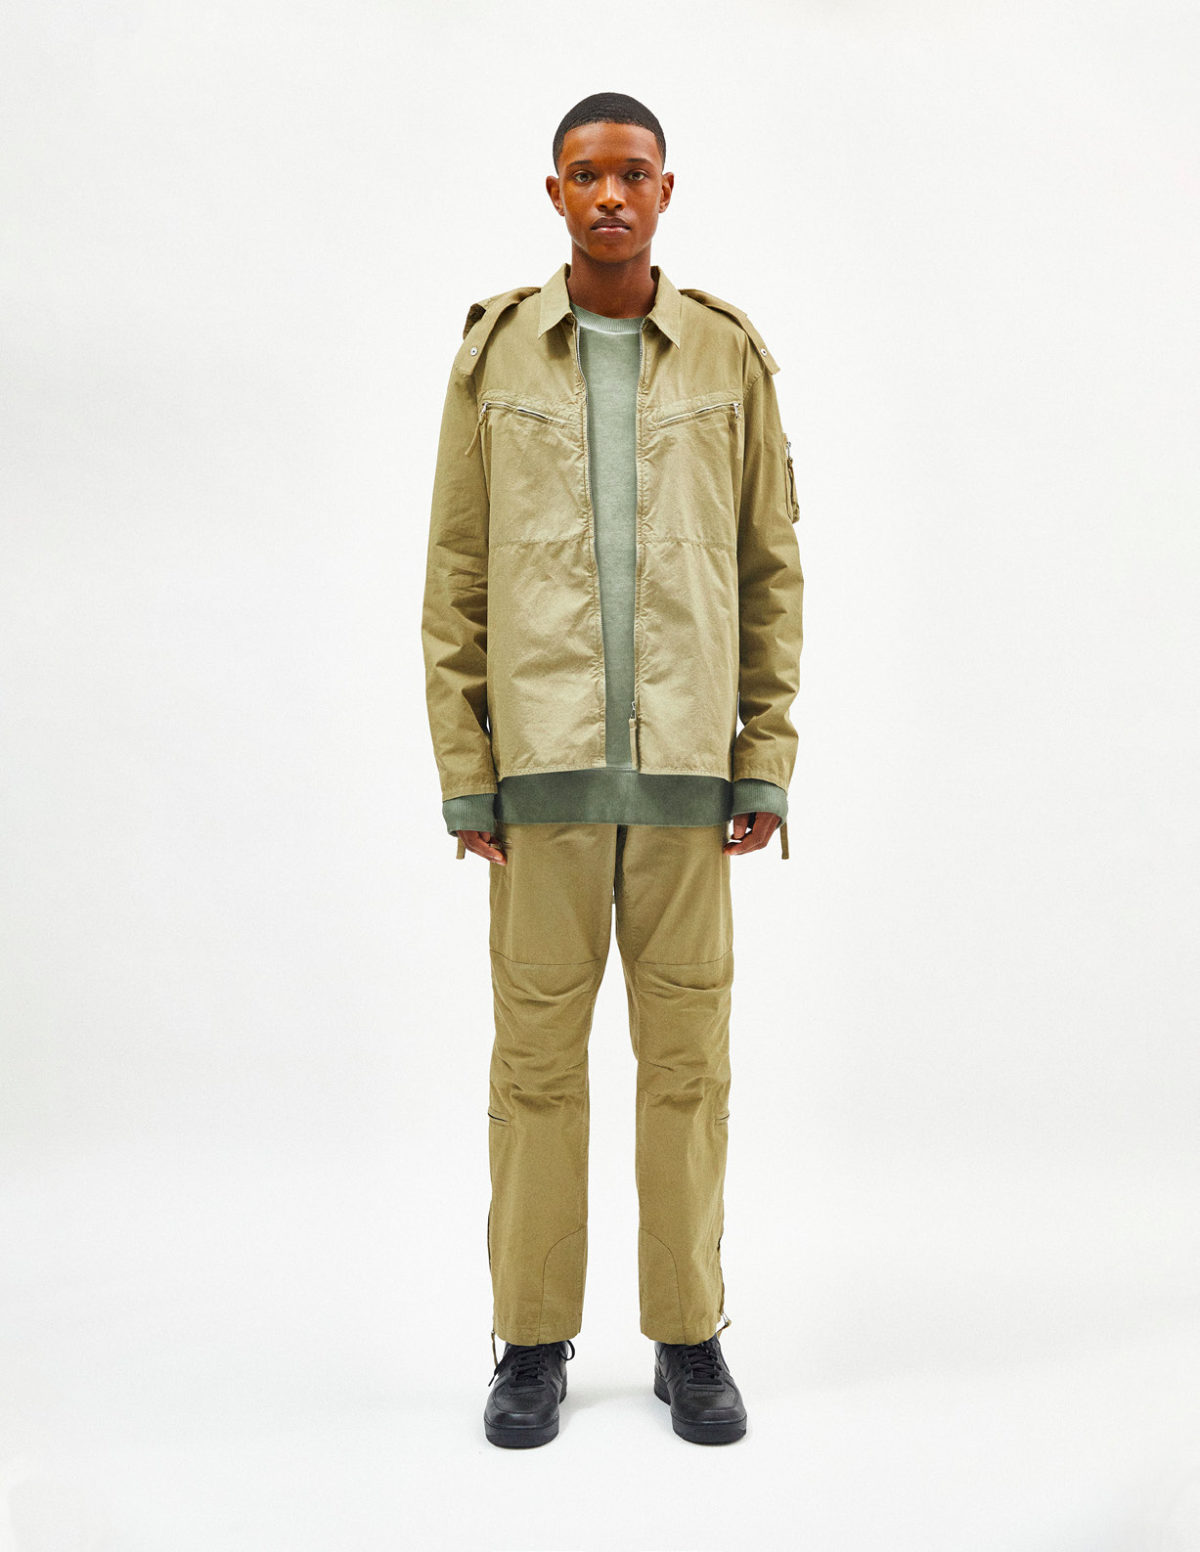 Helmut Lang Pre-Fall 2021 Menswear Collection